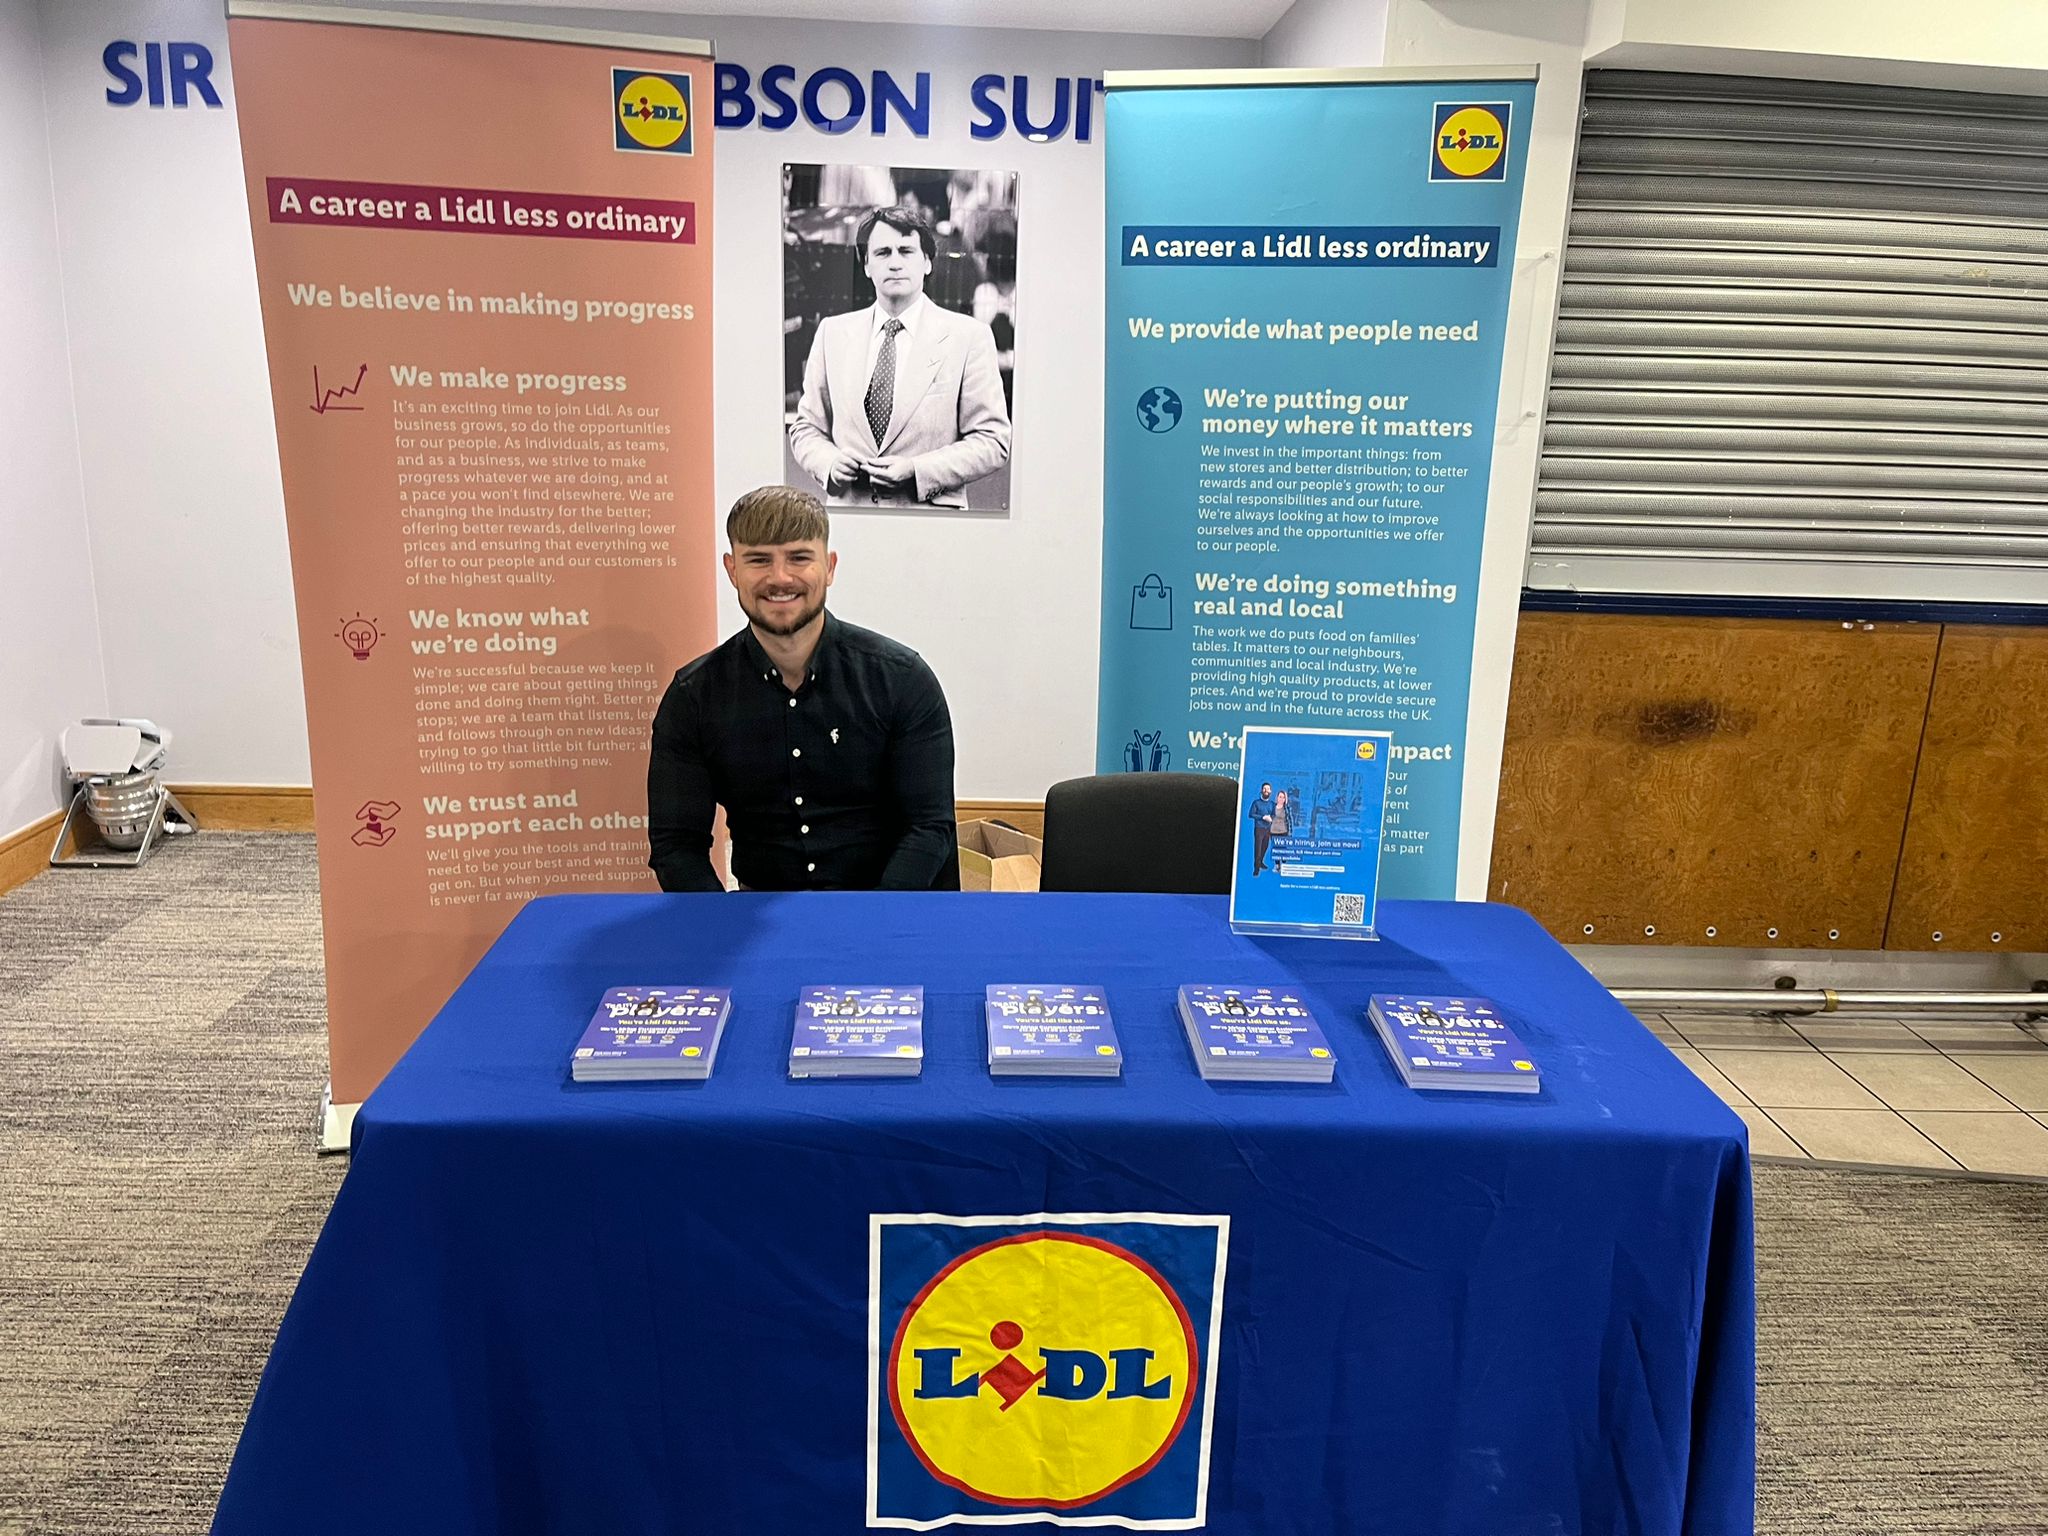 Lidl at our event in Ipswich